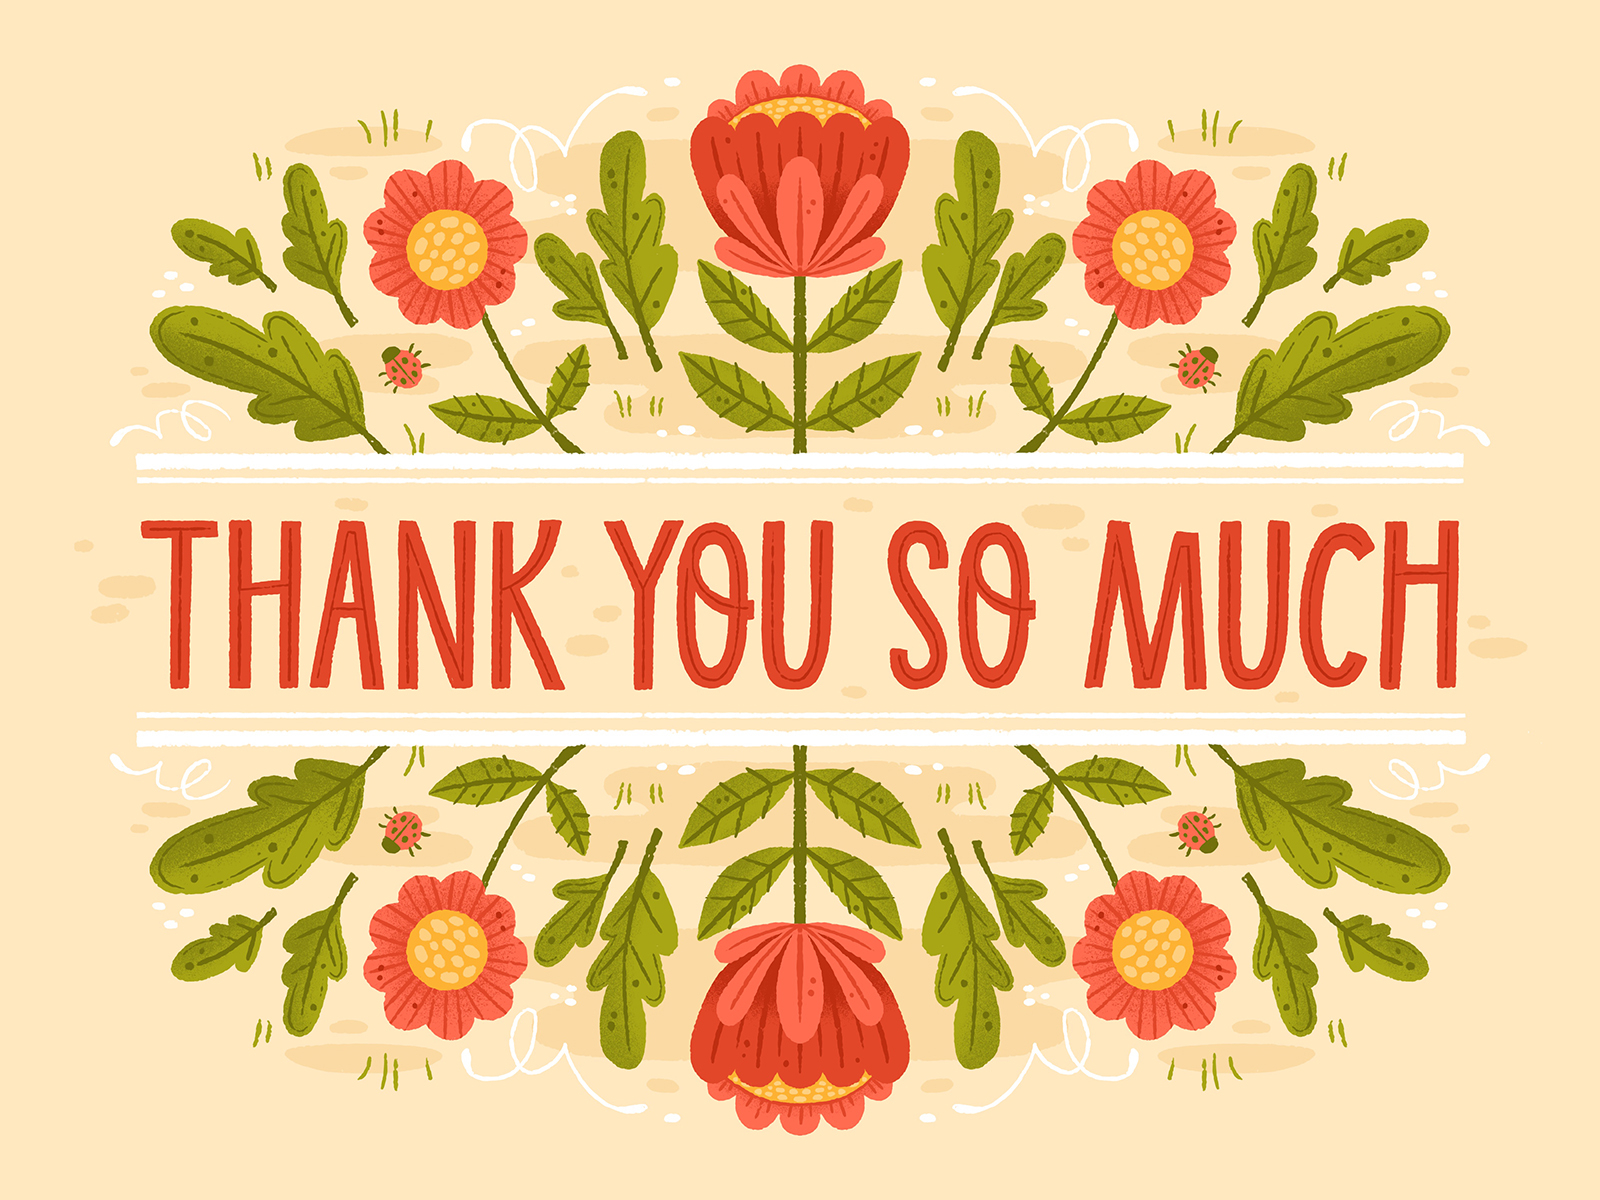 Thank you so much by Jessica Gunderson on Dribbble